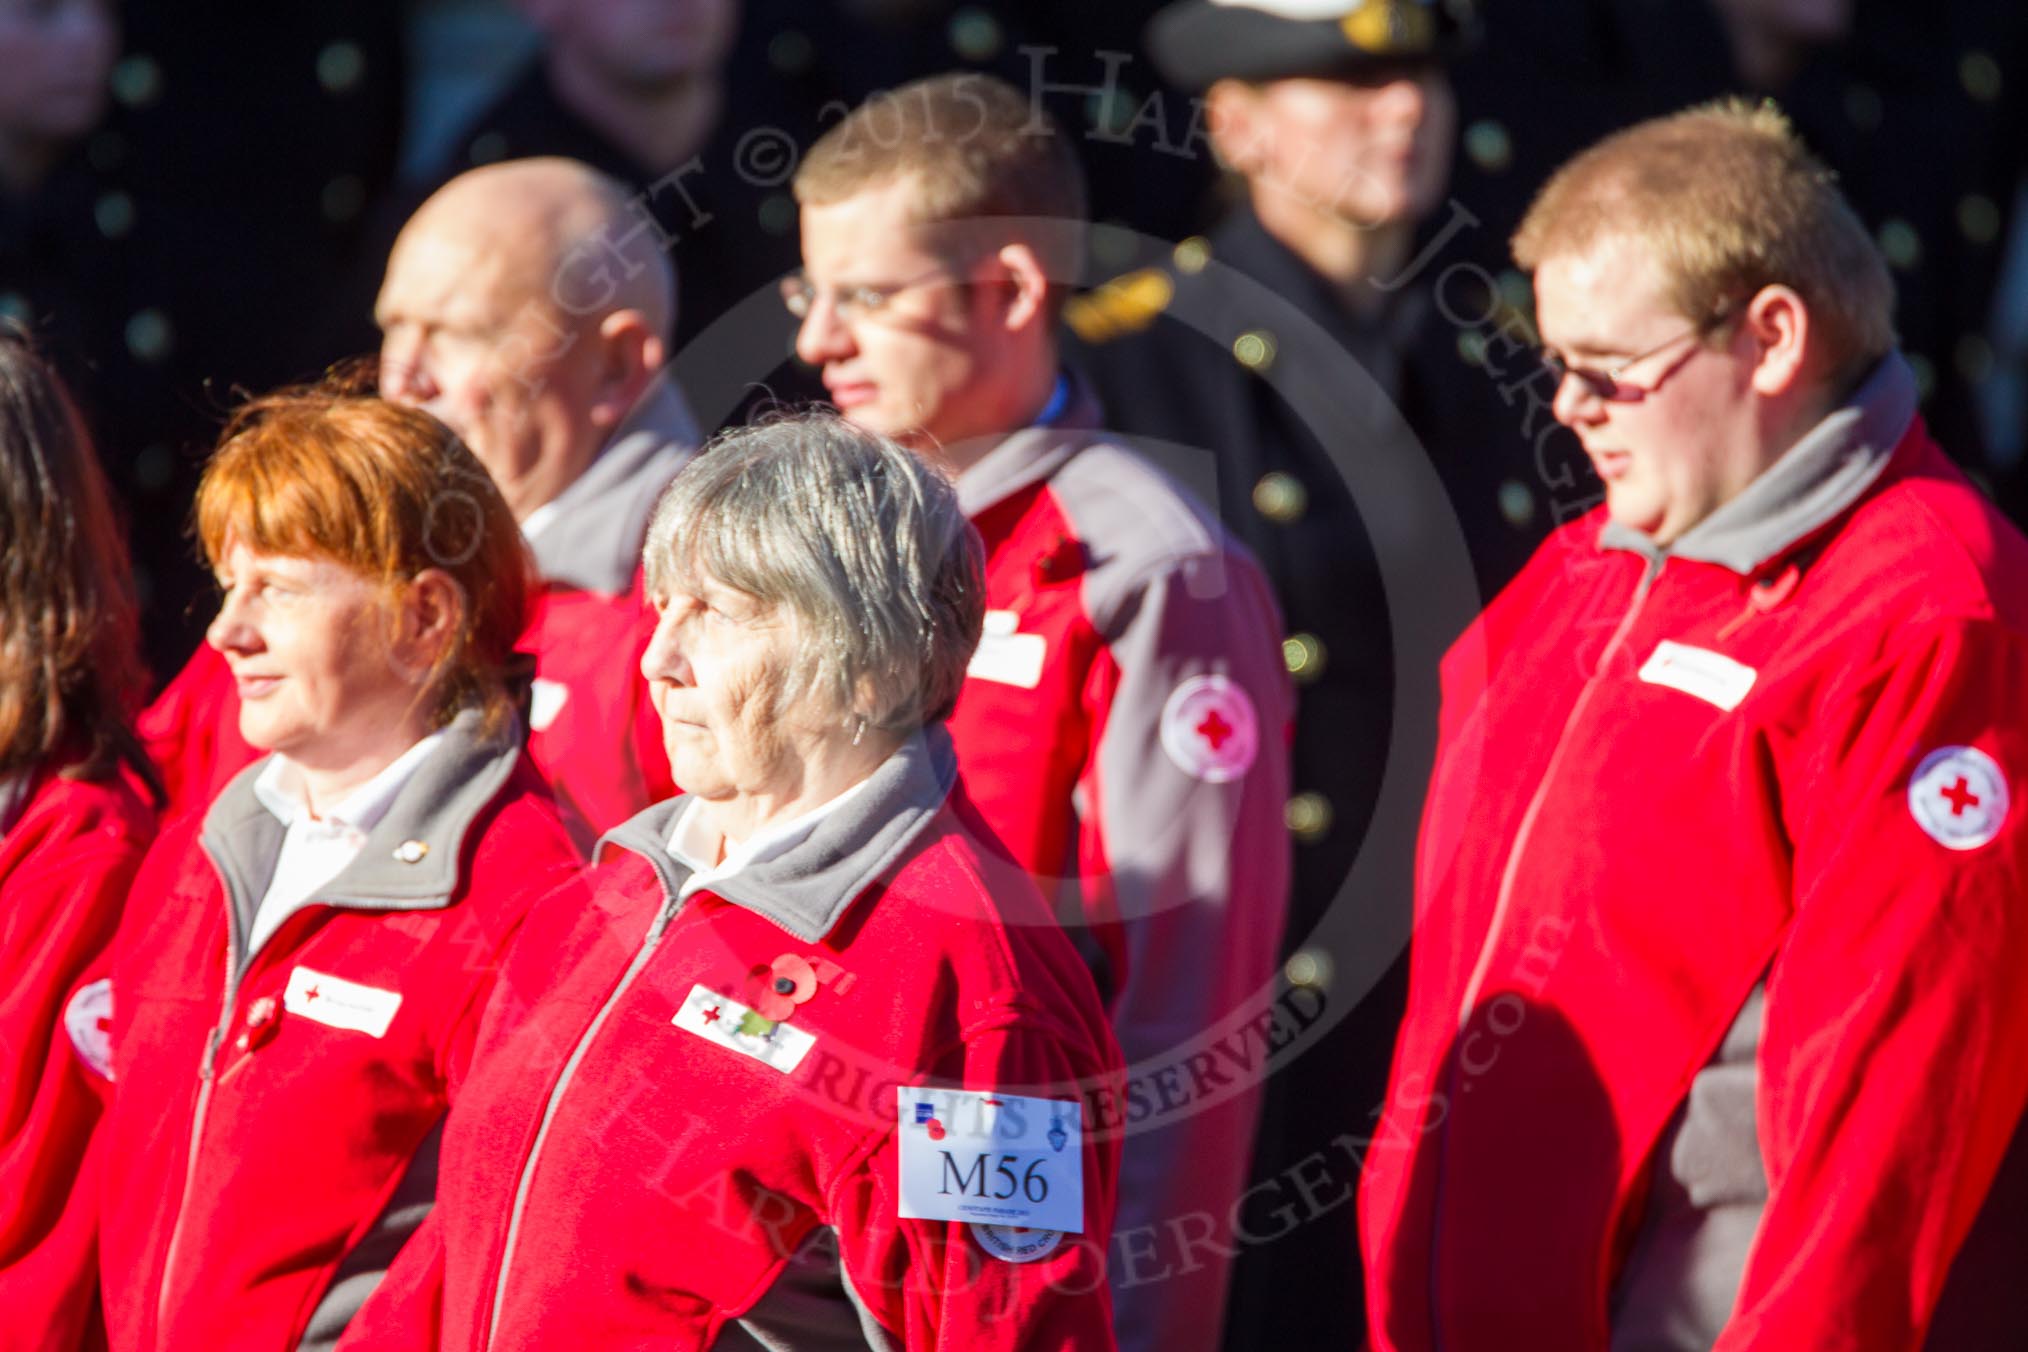 Remembrance Sunday Cenotaph March Past 2013: M56 - British Red Cross..
Press stand opposite the Foreign Office building, Whitehall, London SW1,
London,
Greater London,
United Kingdom,
on 10 November 2013 at 12:16, image #2341